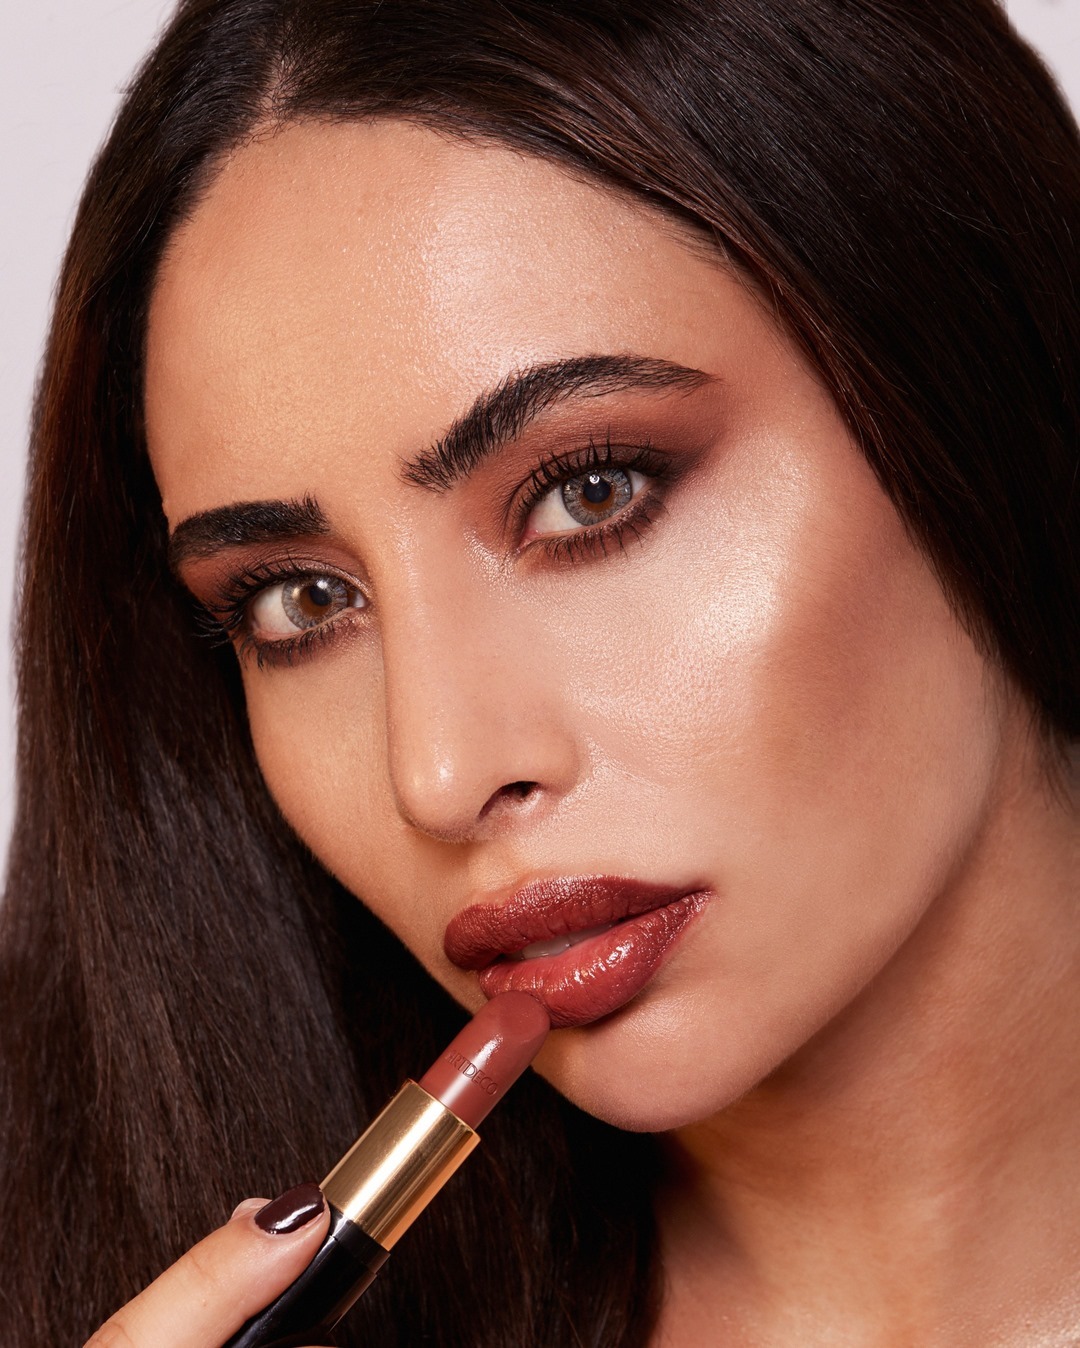 ARTDECO - Fall nights create moments to inspire! Welcome to our NEW GOLDEN TWENTIES collection! ⠀⠀⠀⠀⠀⠀⠀⠀⠀
⠀⠀⠀⠀⠀⠀⠀⠀⠀
Get the look:⠀⠀⠀⠀⠀⠀⠀⠀⠀
Beauty Box Quattro limited edition⠀⠀⠀⠀⠀⠀⠀⠀⠀
Eyeshadow N°525 m...